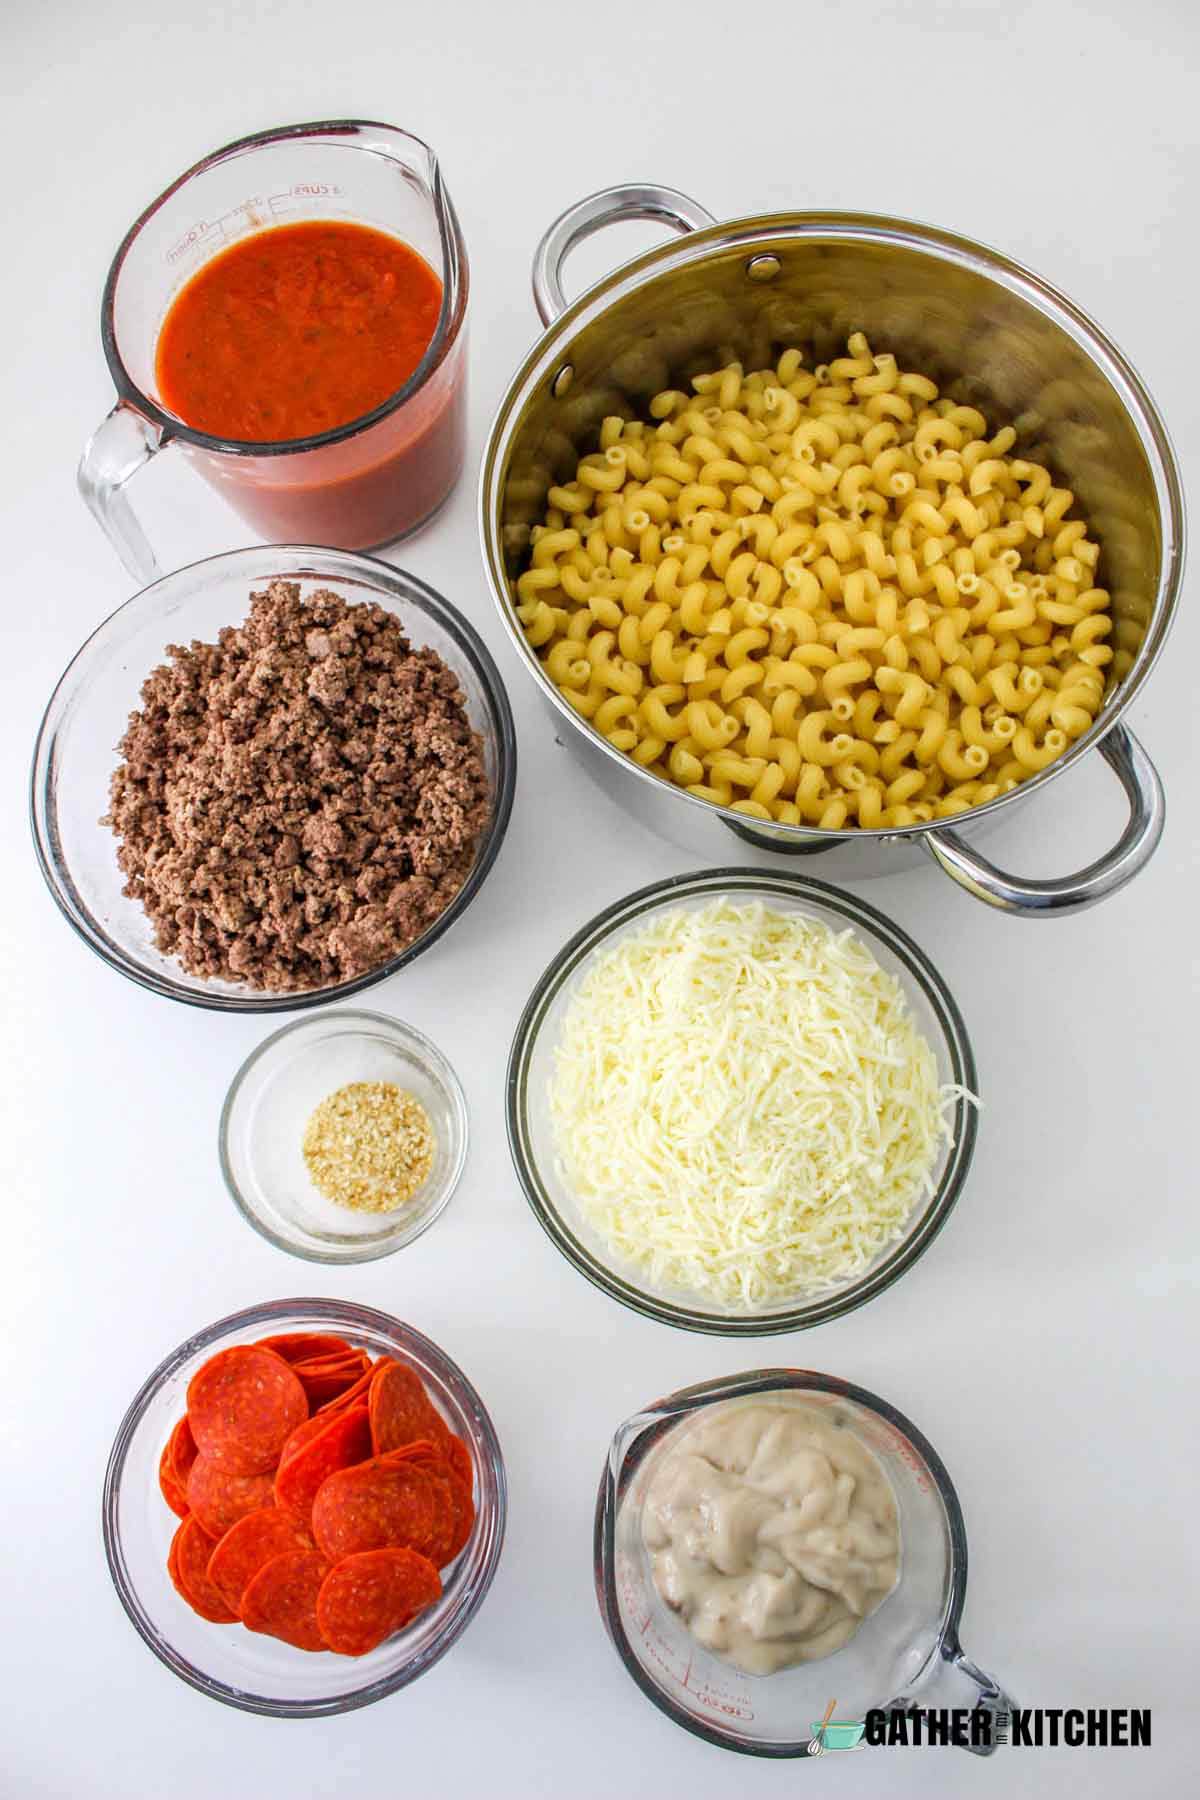 Ingredients for pizza casserole: elbow macaroni, ground beef, onions, cream of mushroom, mozzarella, minced onions, and pizza sauce.